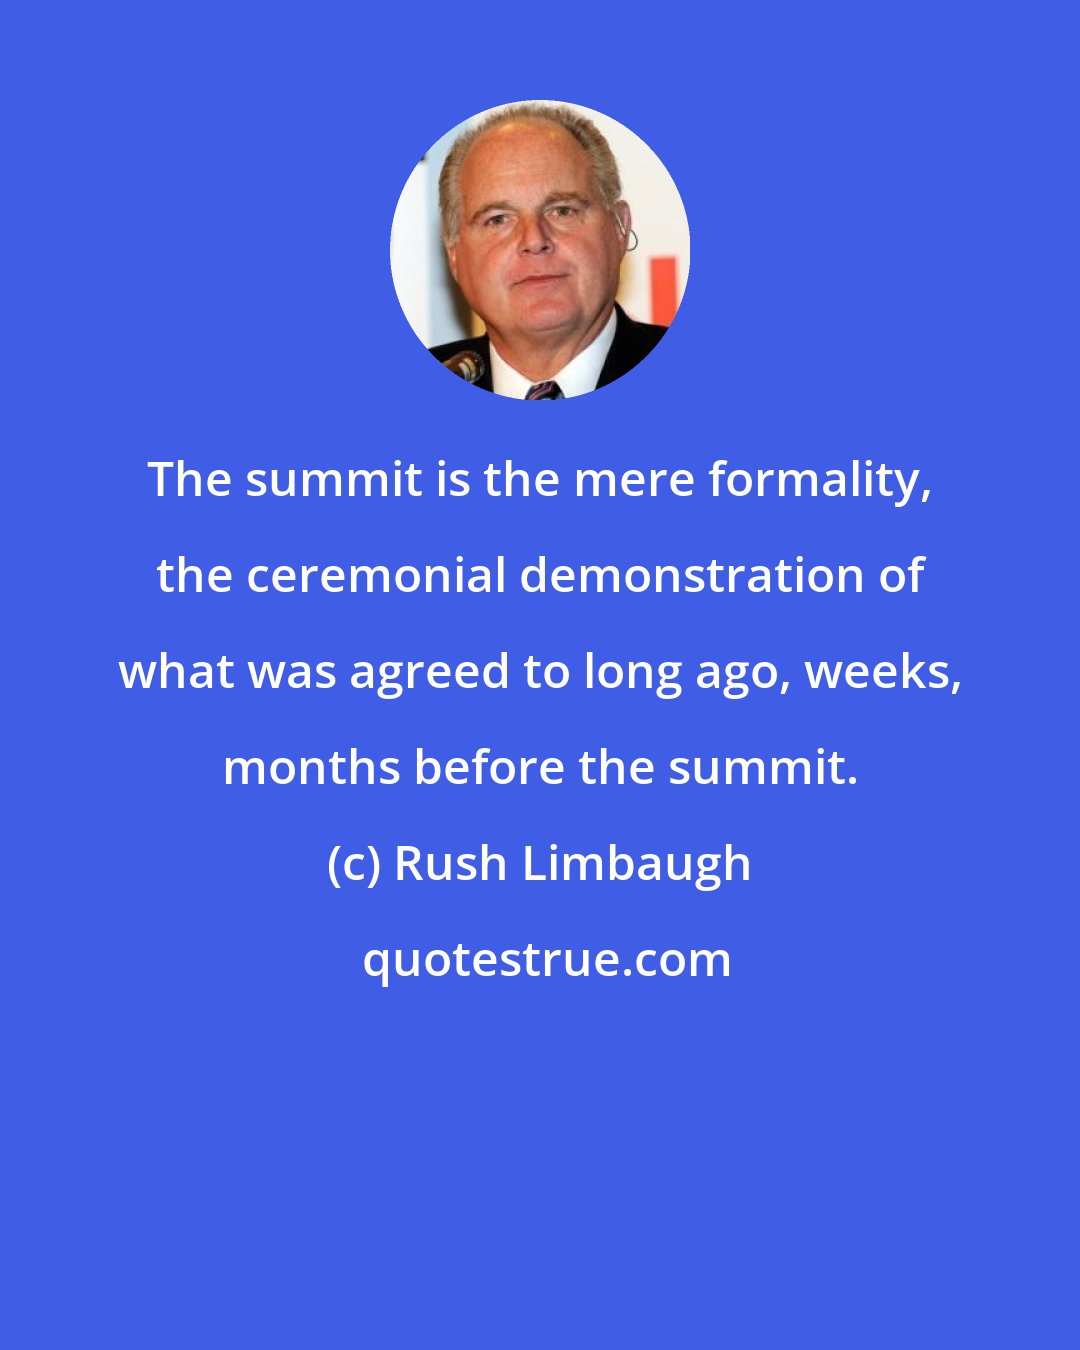 Rush Limbaugh: The summit is the mere formality, the ceremonial demonstration of what was agreed to long ago, weeks, months before the summit.